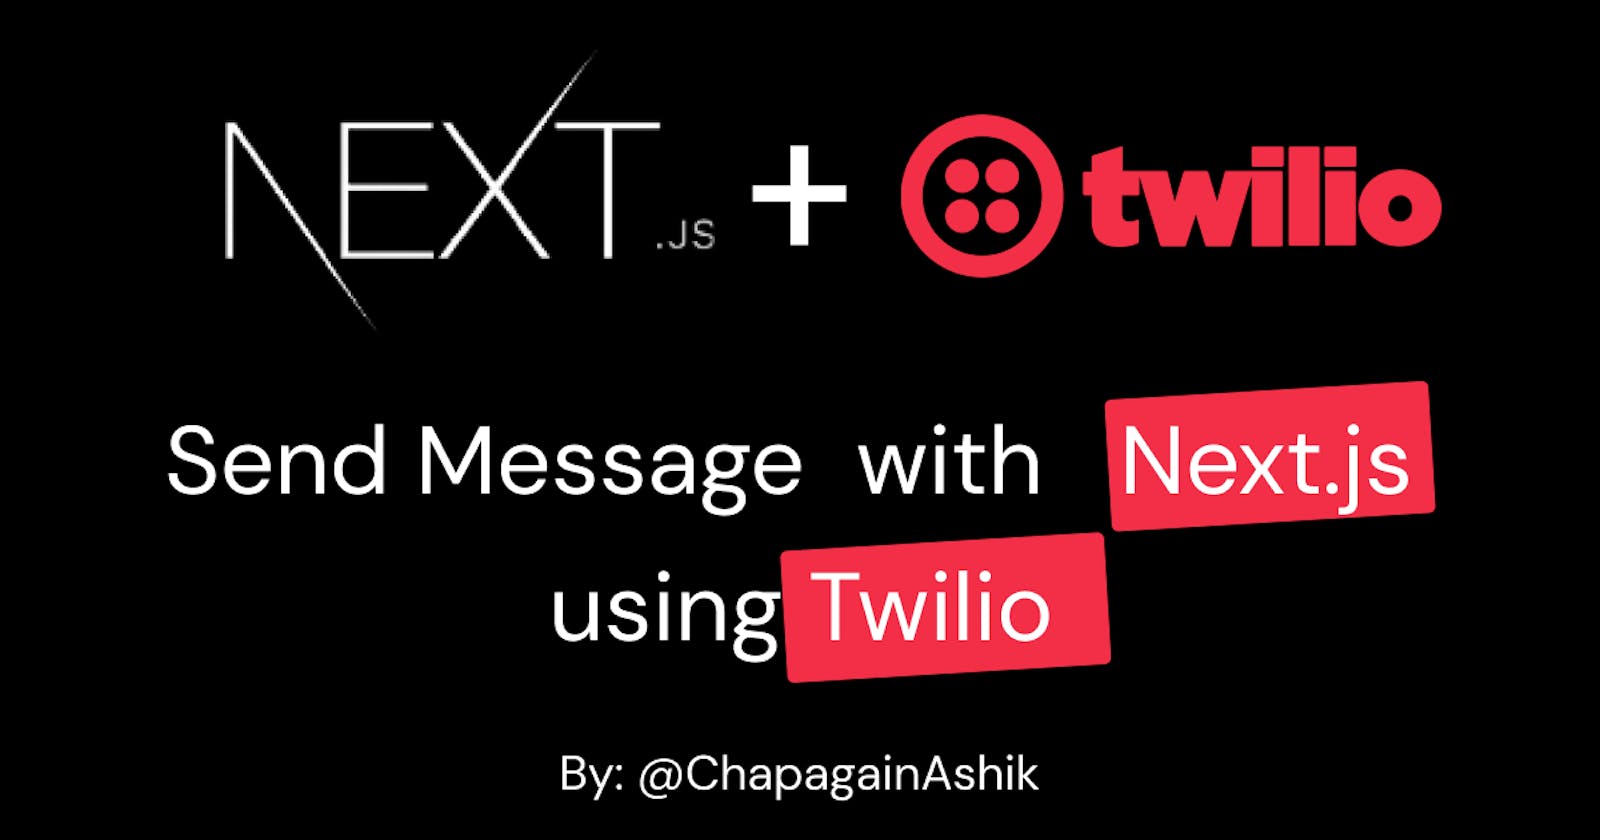 Here's how you can send messages to your phone with Next.js and Twilio
?